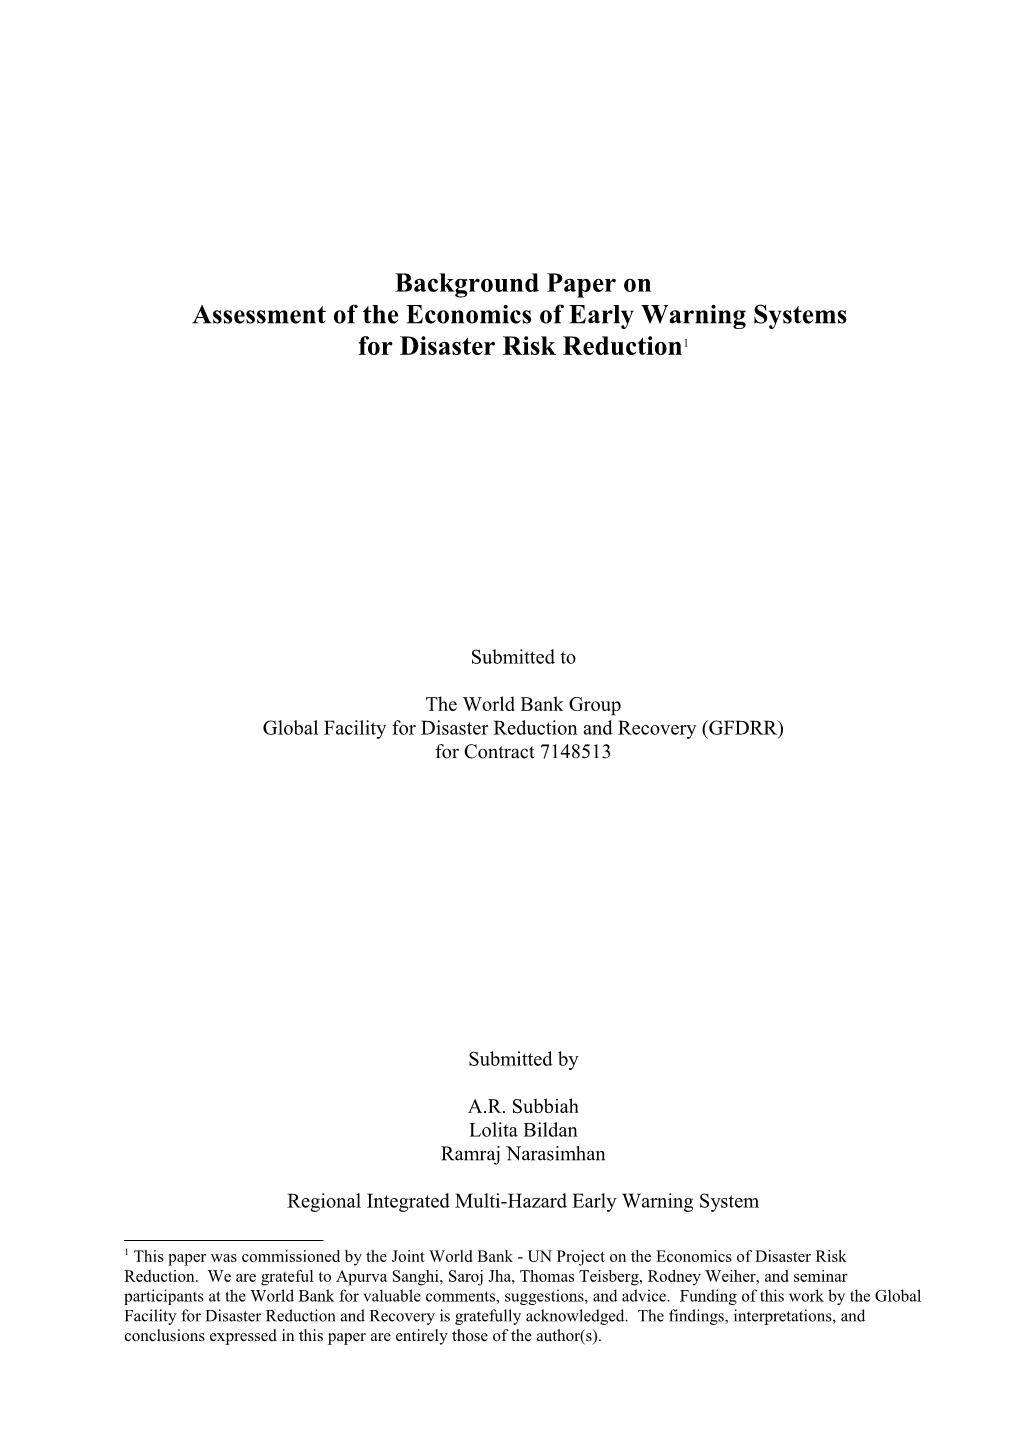 Assessment of the Economics of Early Warning Systems